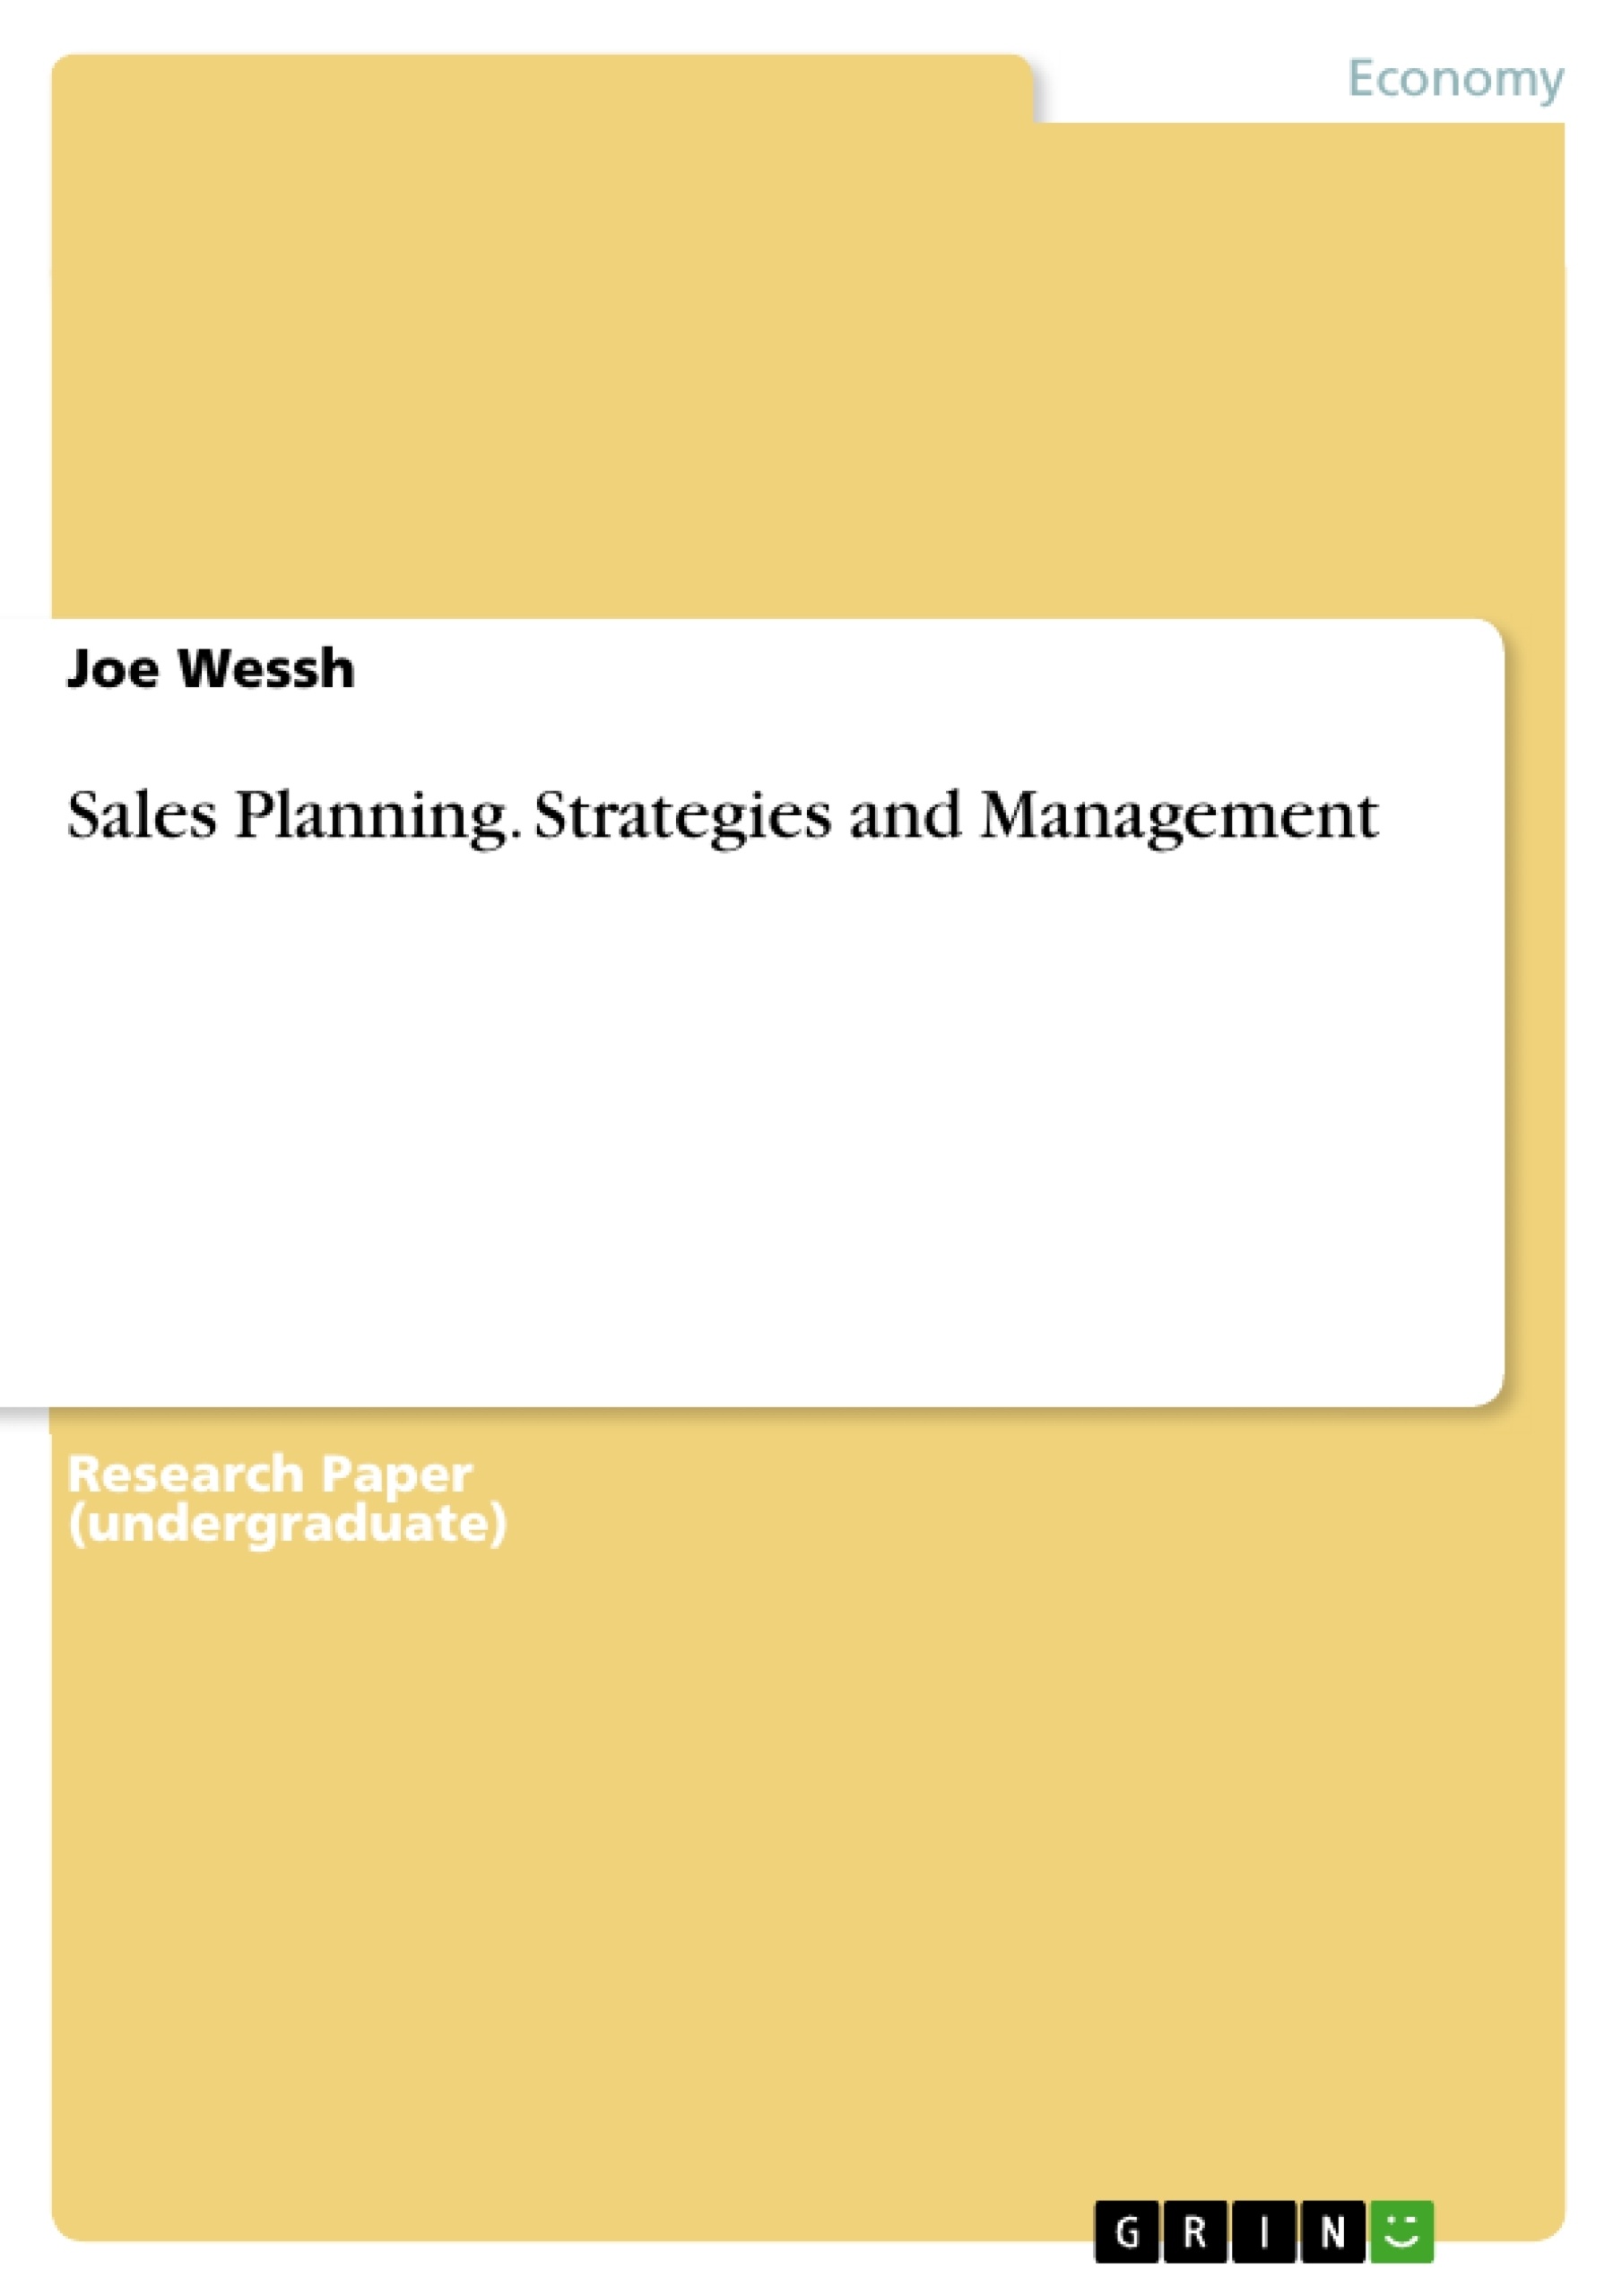 Title: Sales Planning. Strategies and Management